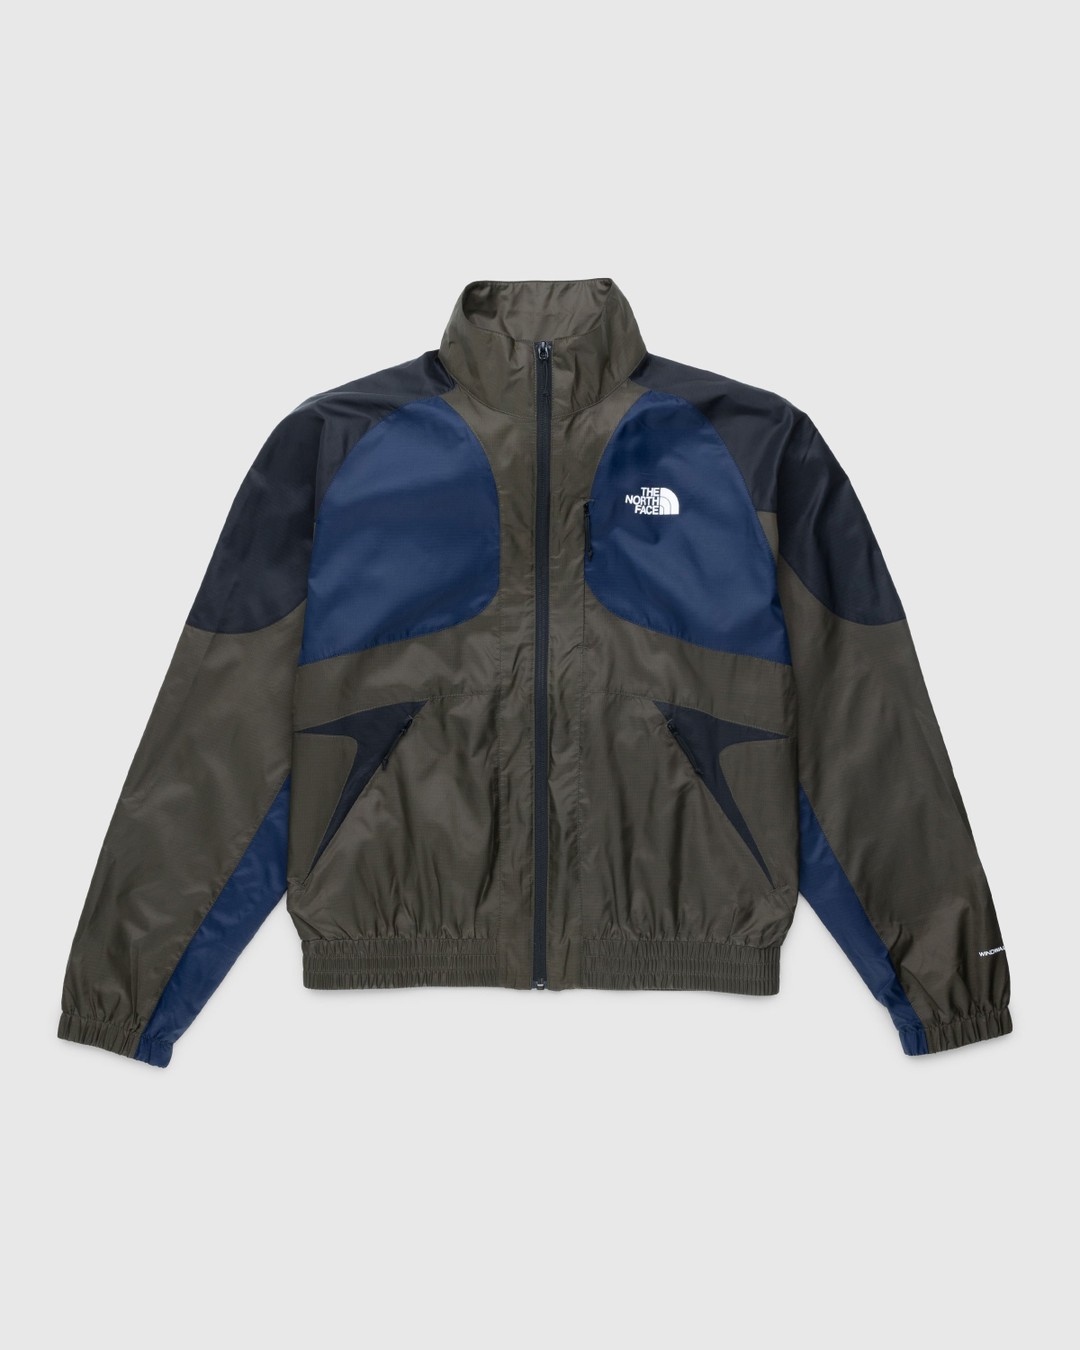 The North Face – TNF X Jacket Green - Outerwear - Blue - Image 1